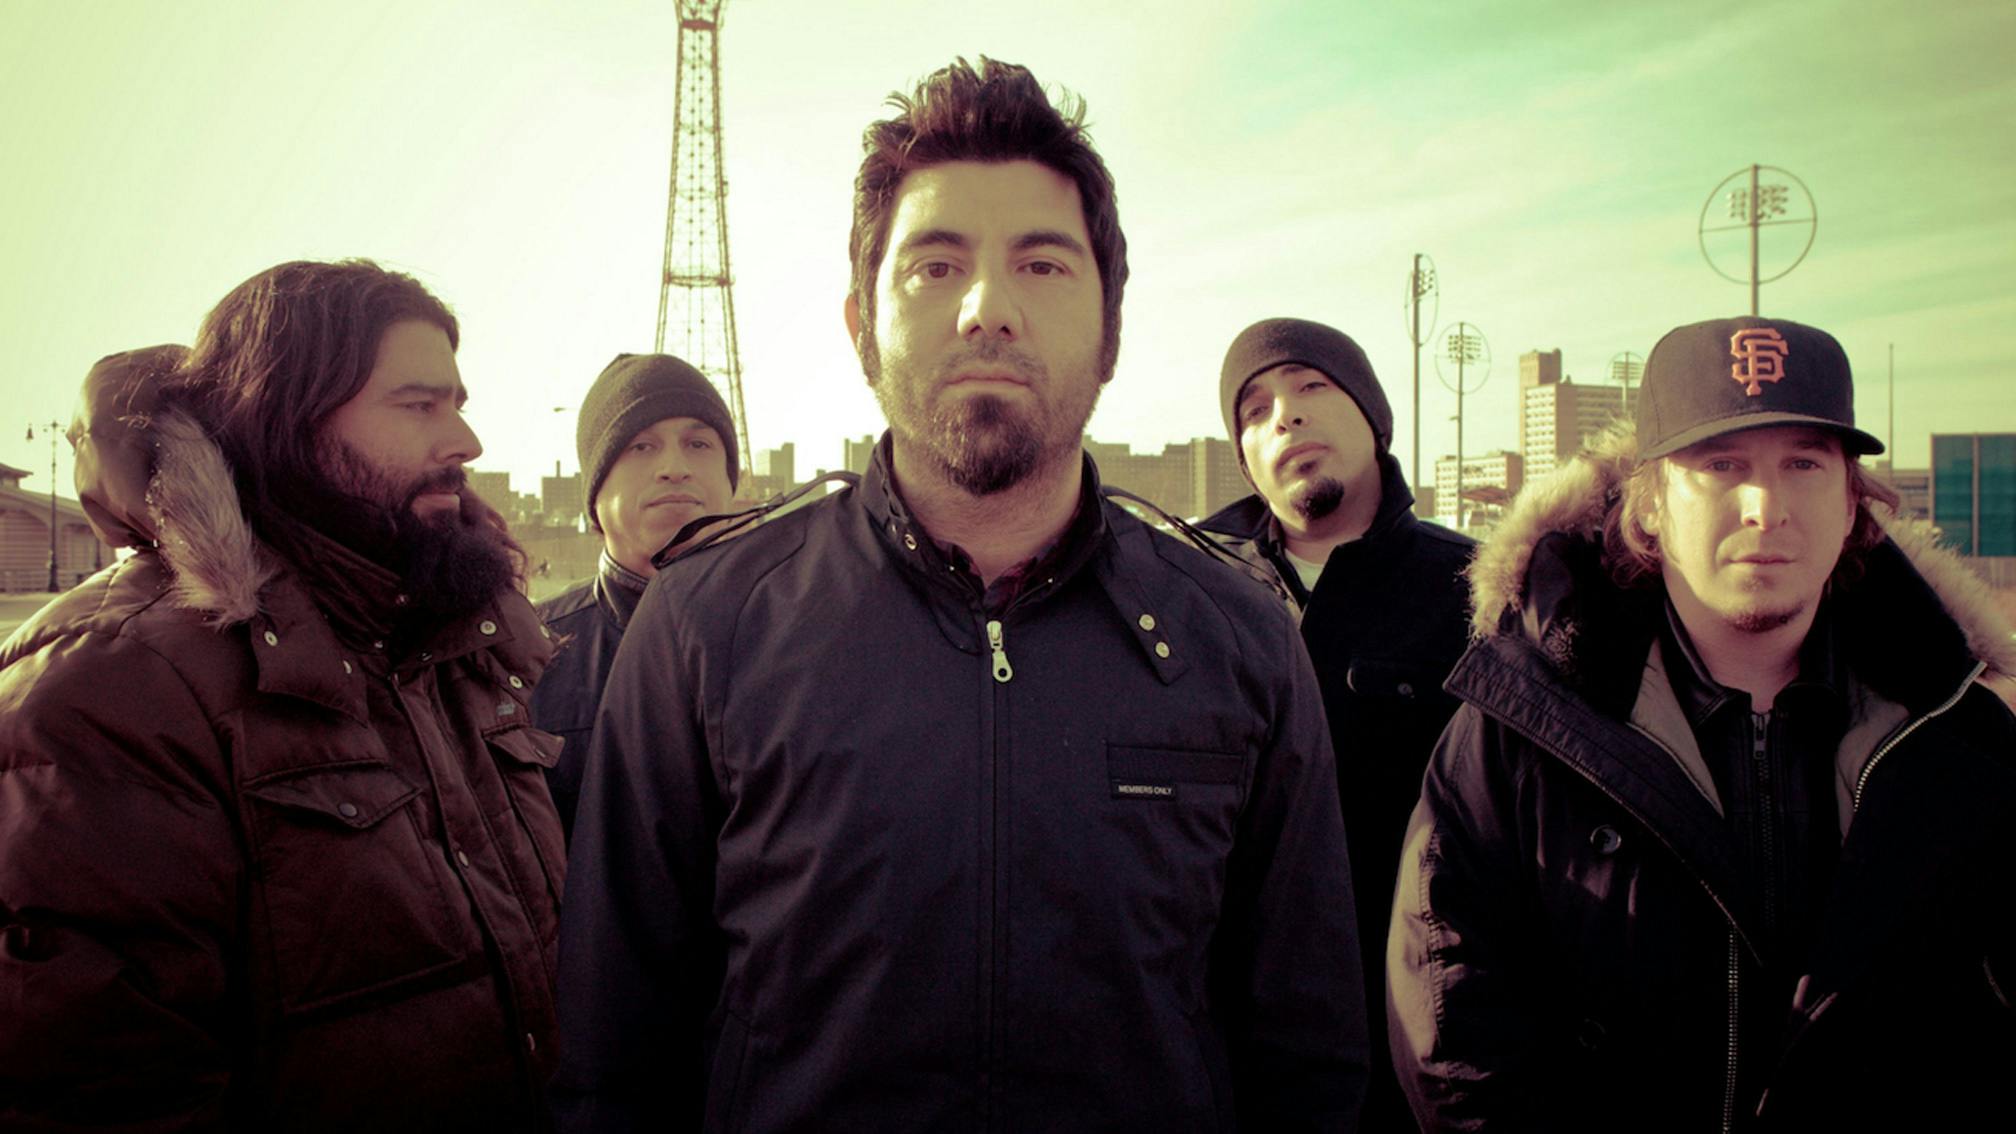 13 bands who wouldn't be here without Deftones